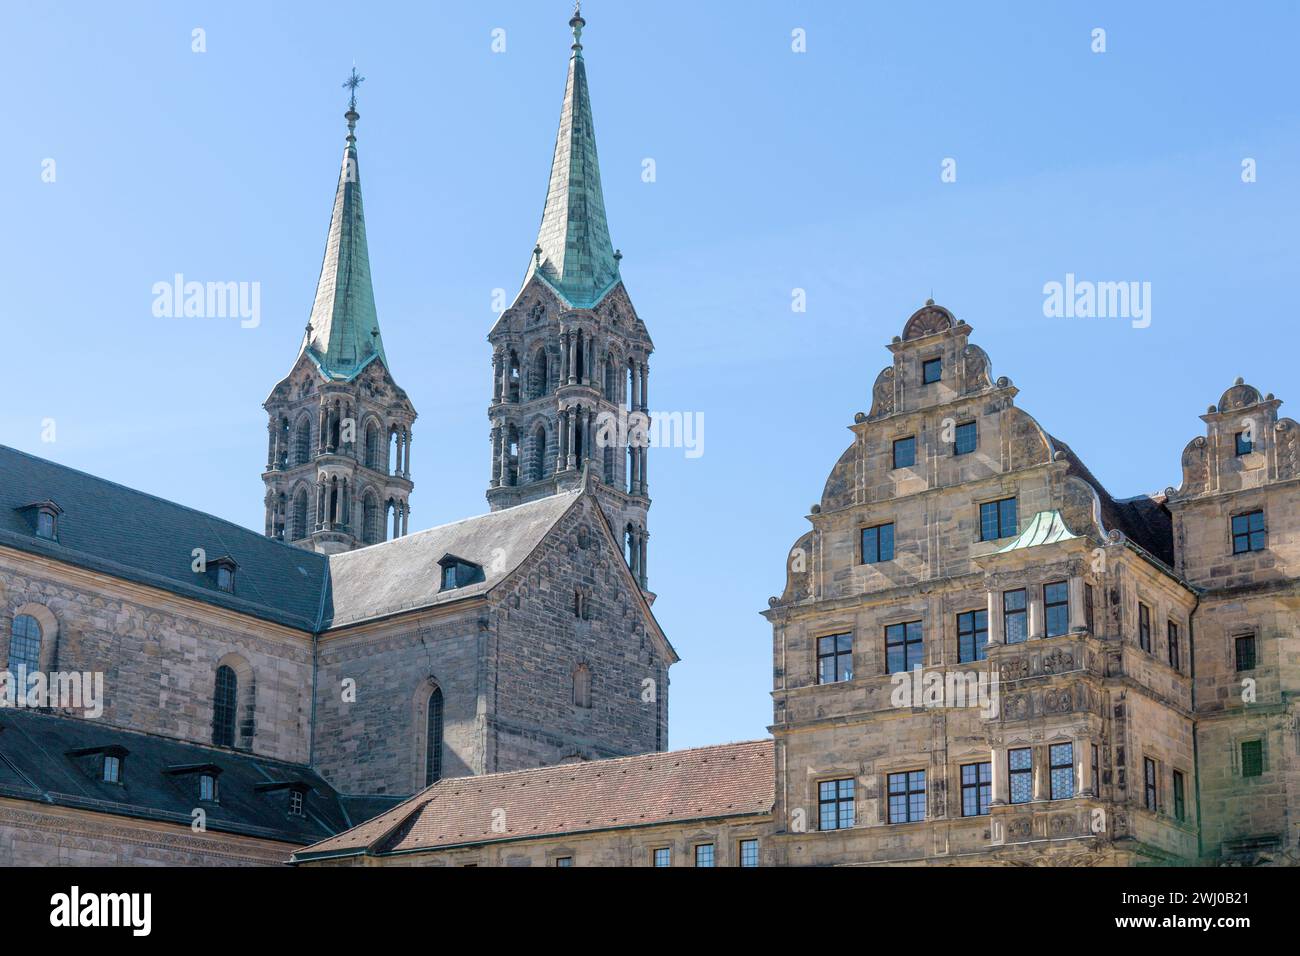 Bamberga, Cattedrale Imperiale, Germania Foto Stock